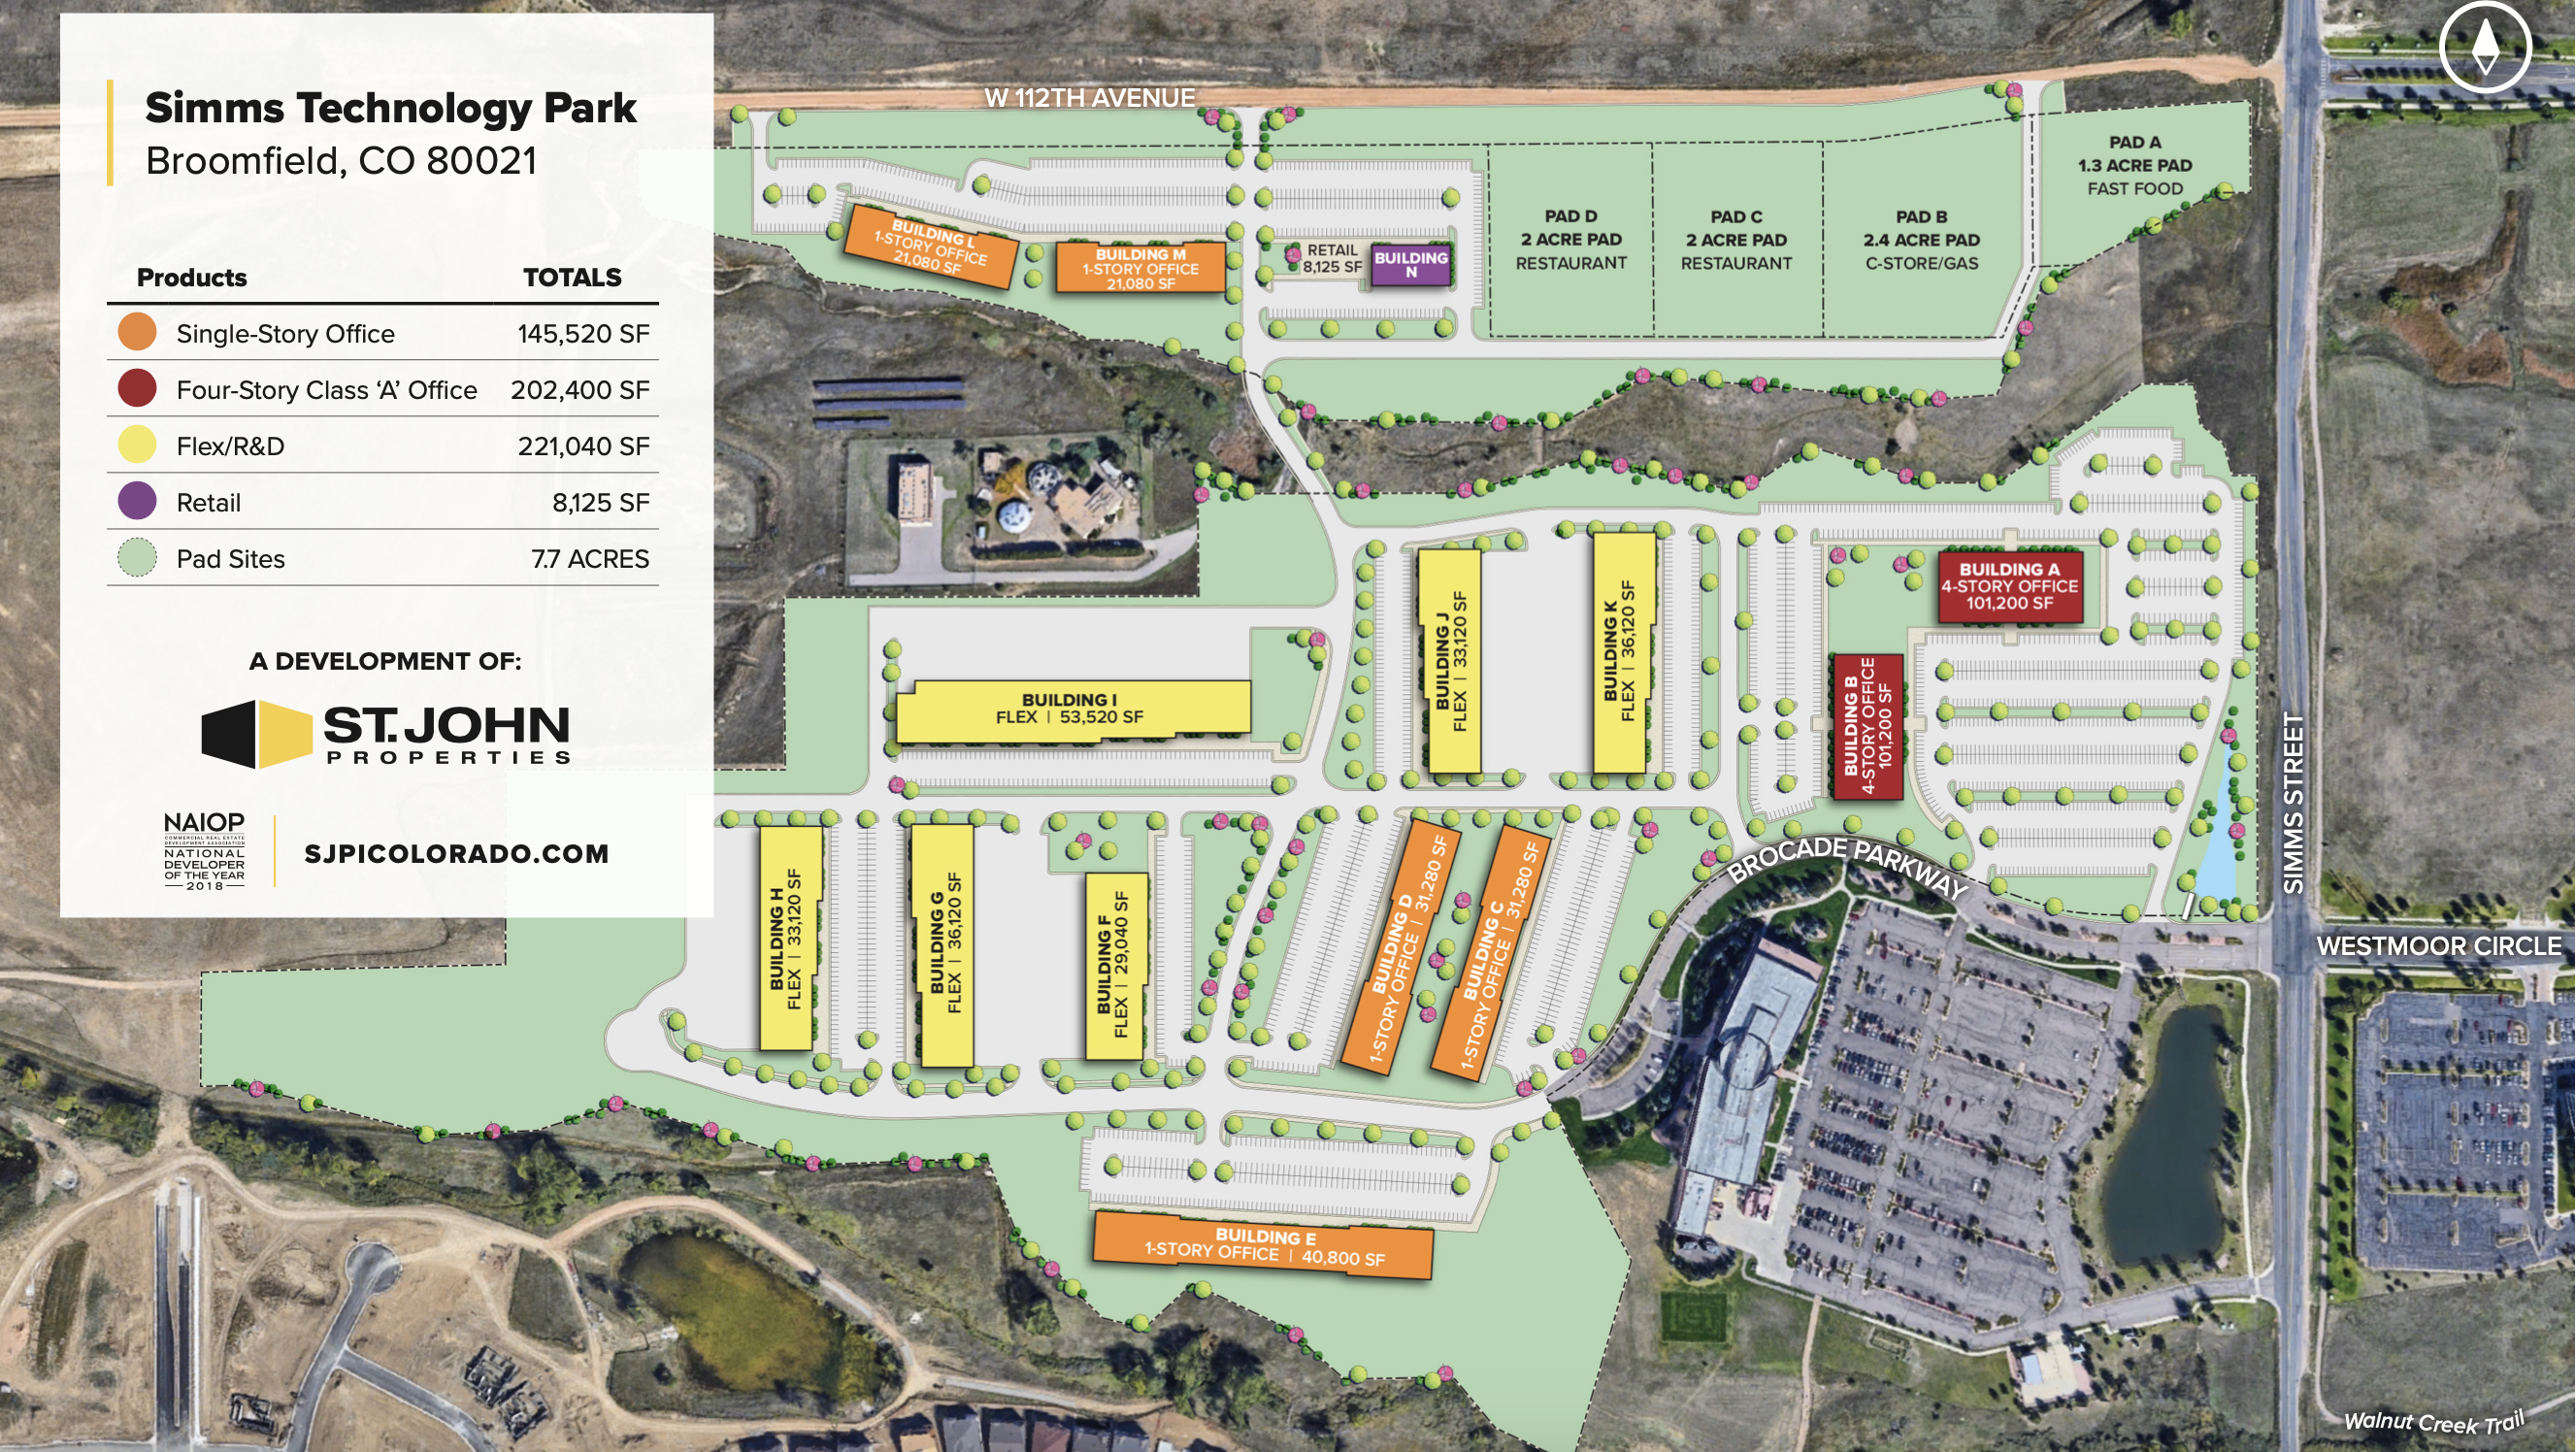 Site plan for Simms Technology Park in Broomfield, CO